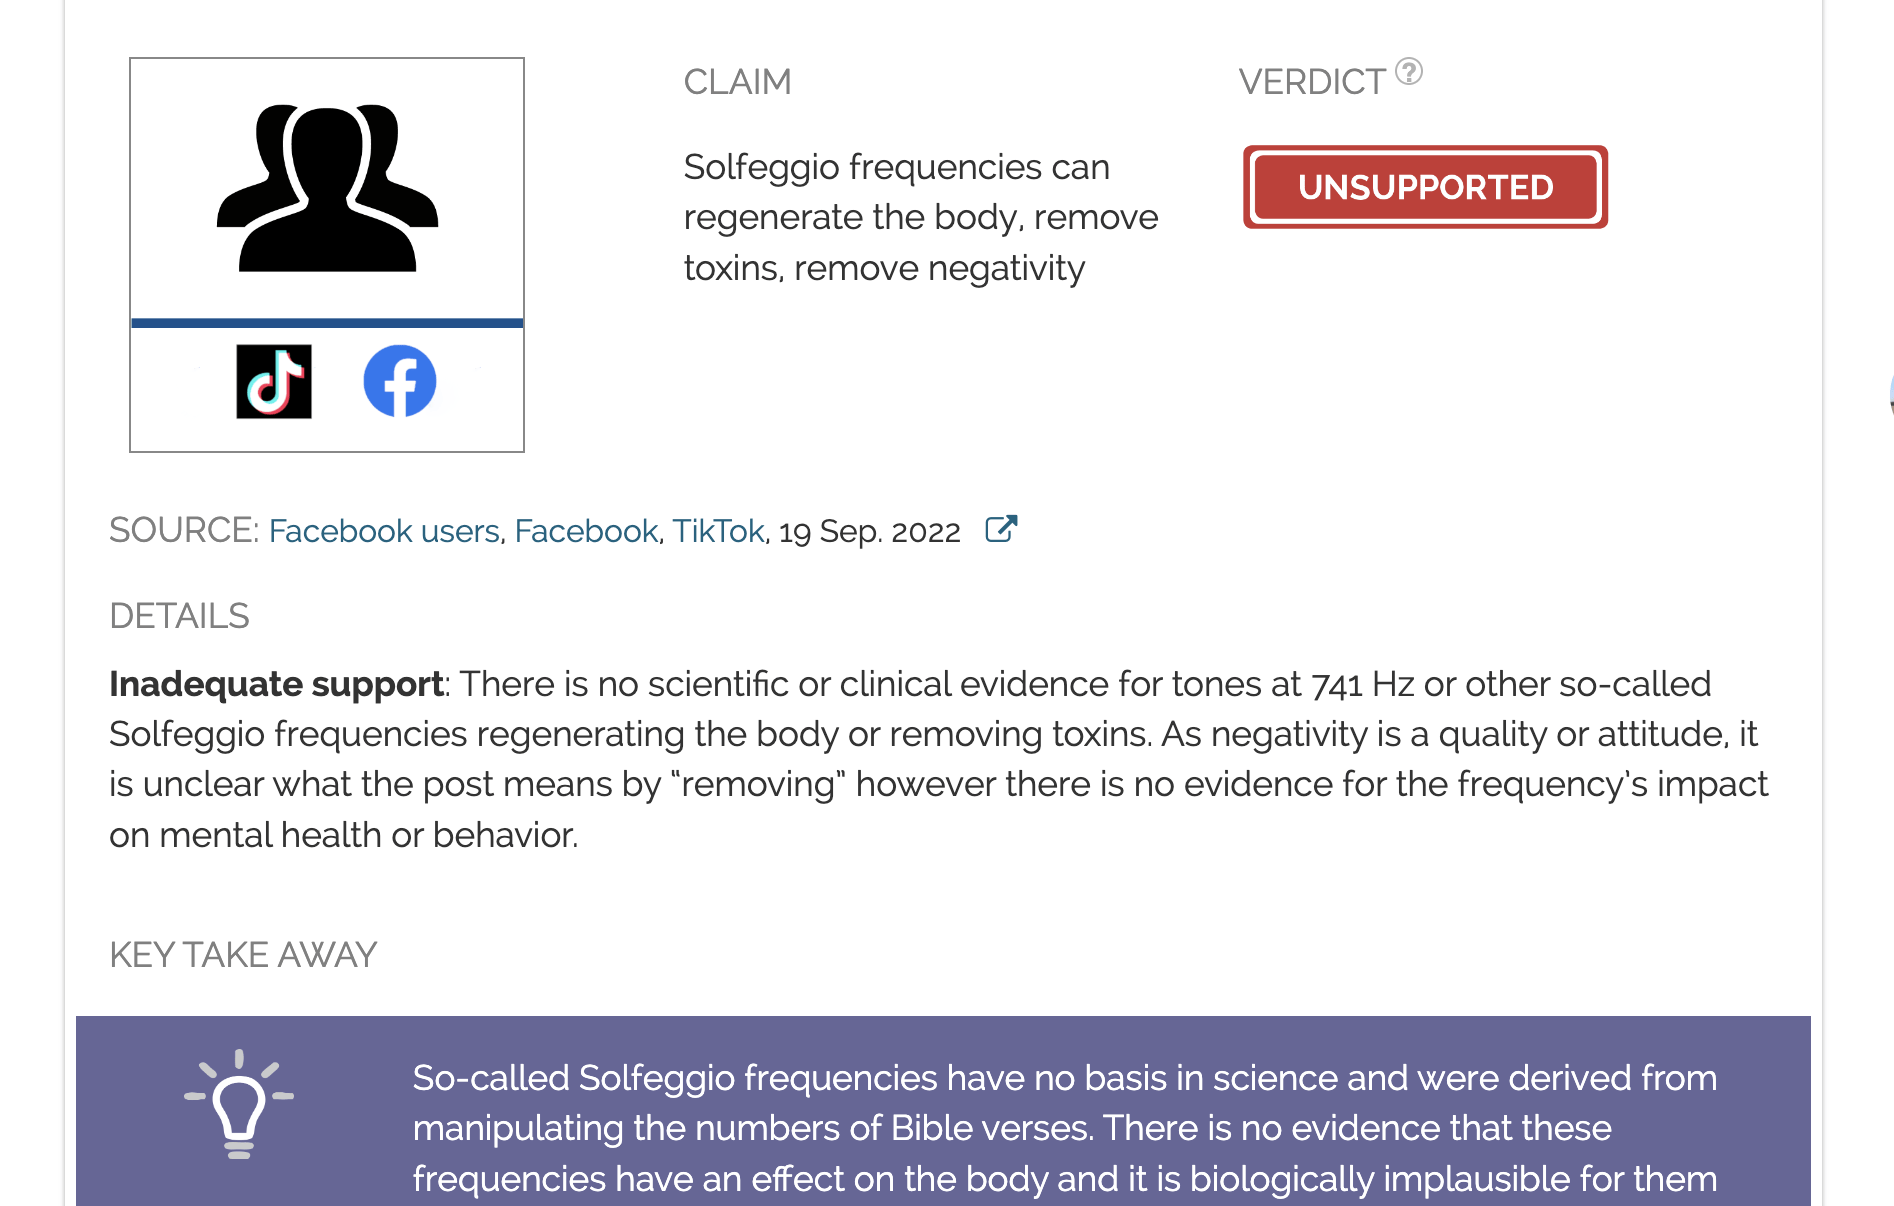 https://healthfeedback.org/wp-content/uploads/2022/09/no-evidence-support-claim-solfeggio-frequencies-remove-toxins-from-body.png